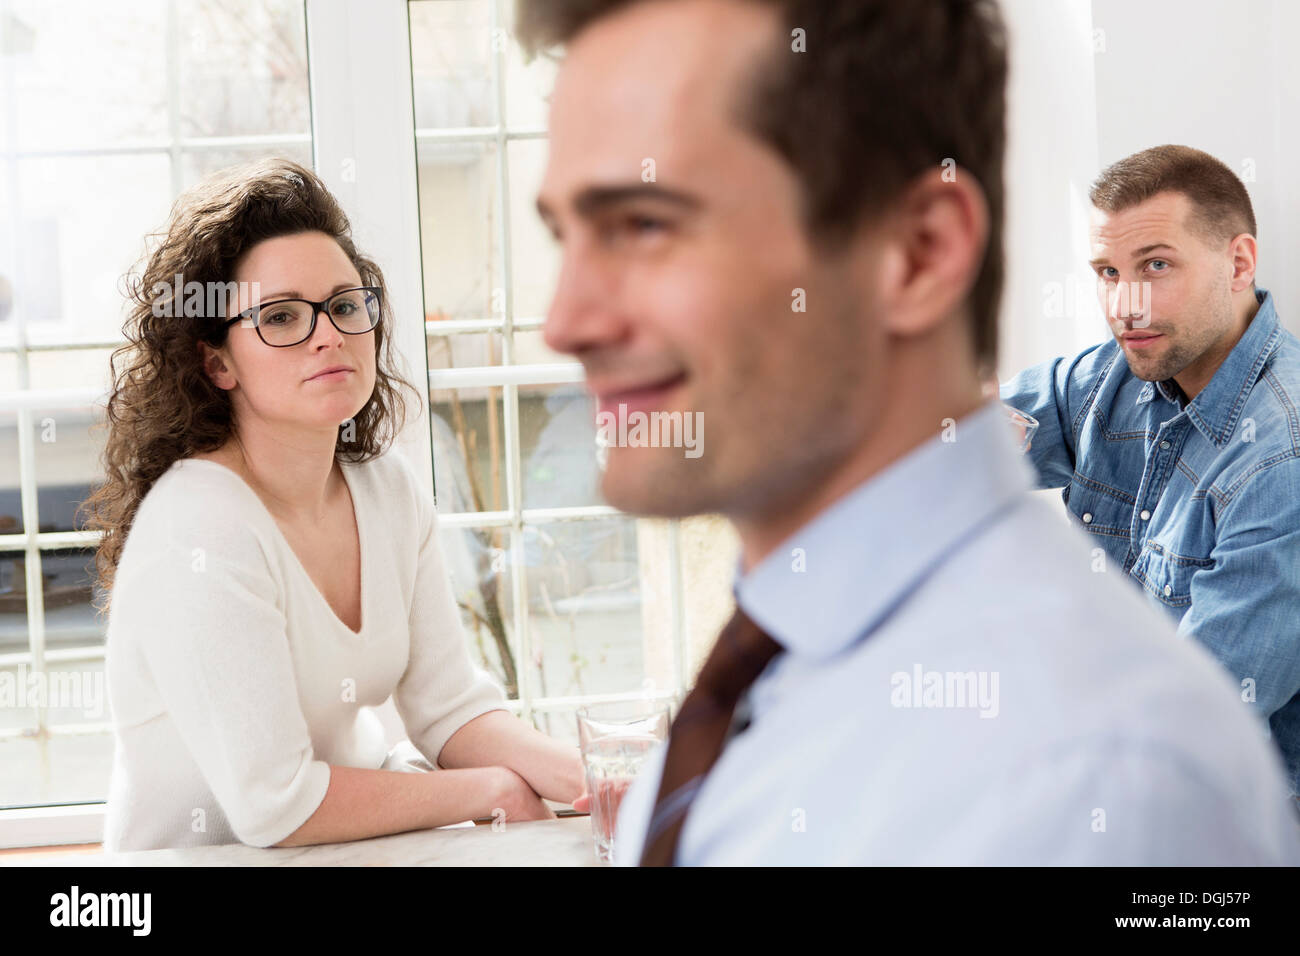 Mature man smiling, mid adults in background Stock Photo